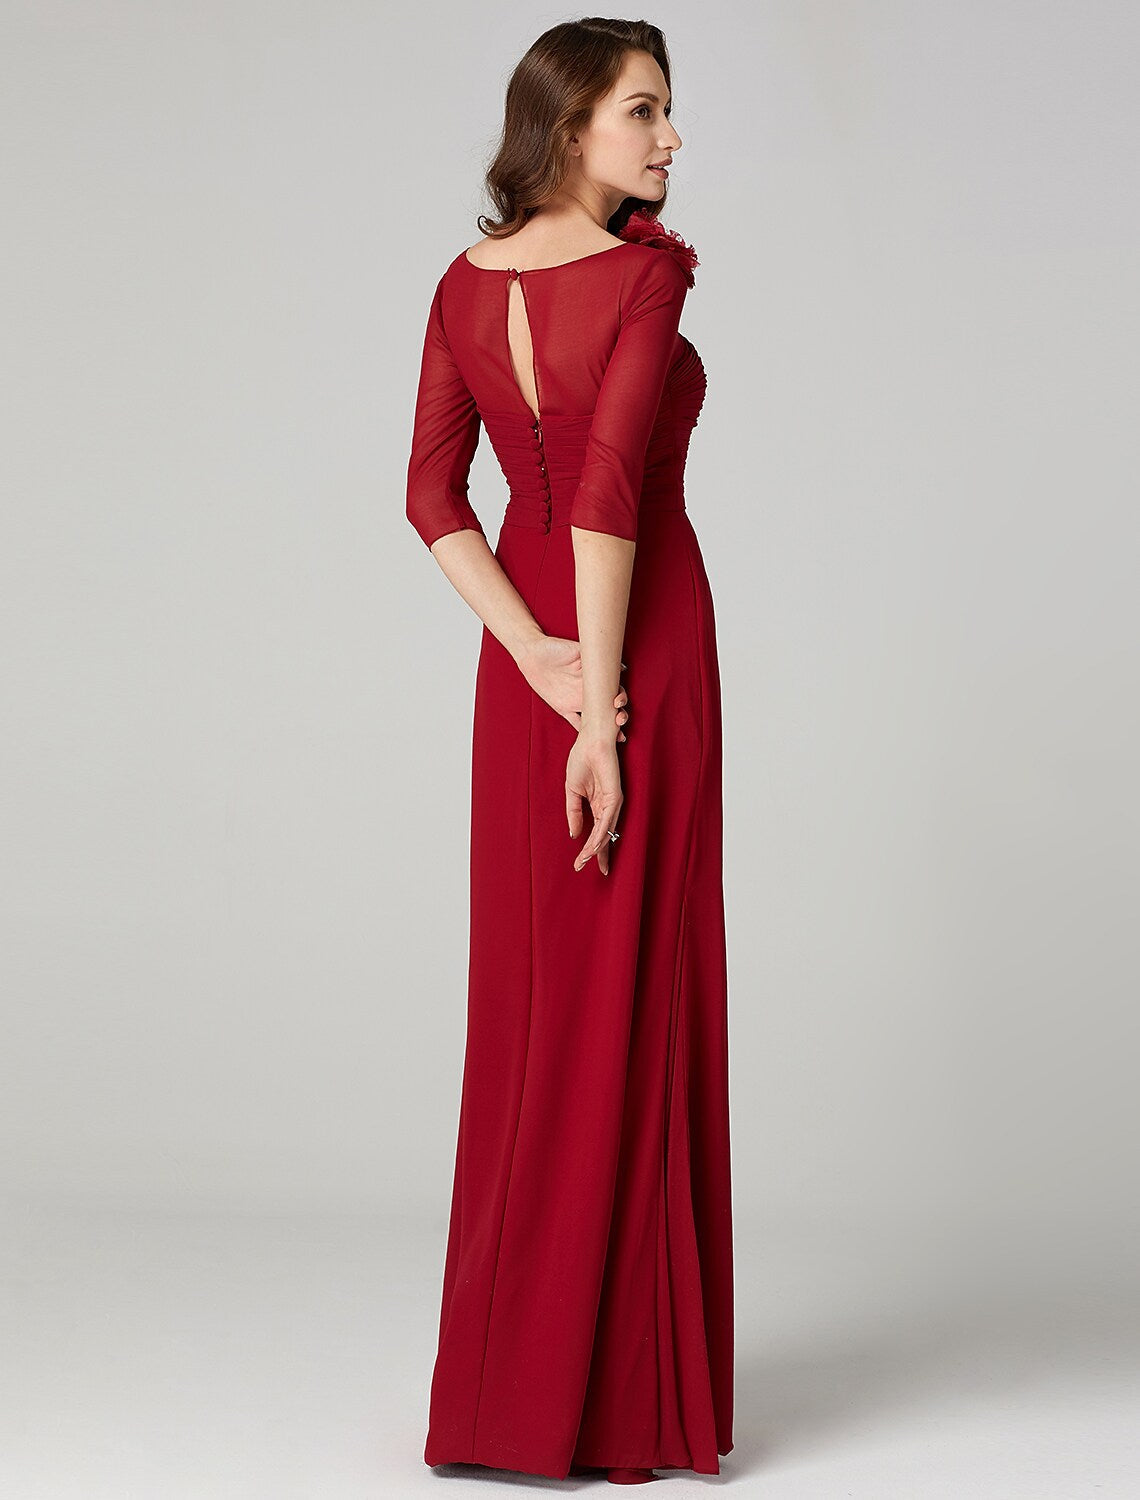 Dress Floor Length Length Sleeve Neck Charmeuse with Ruched Flower